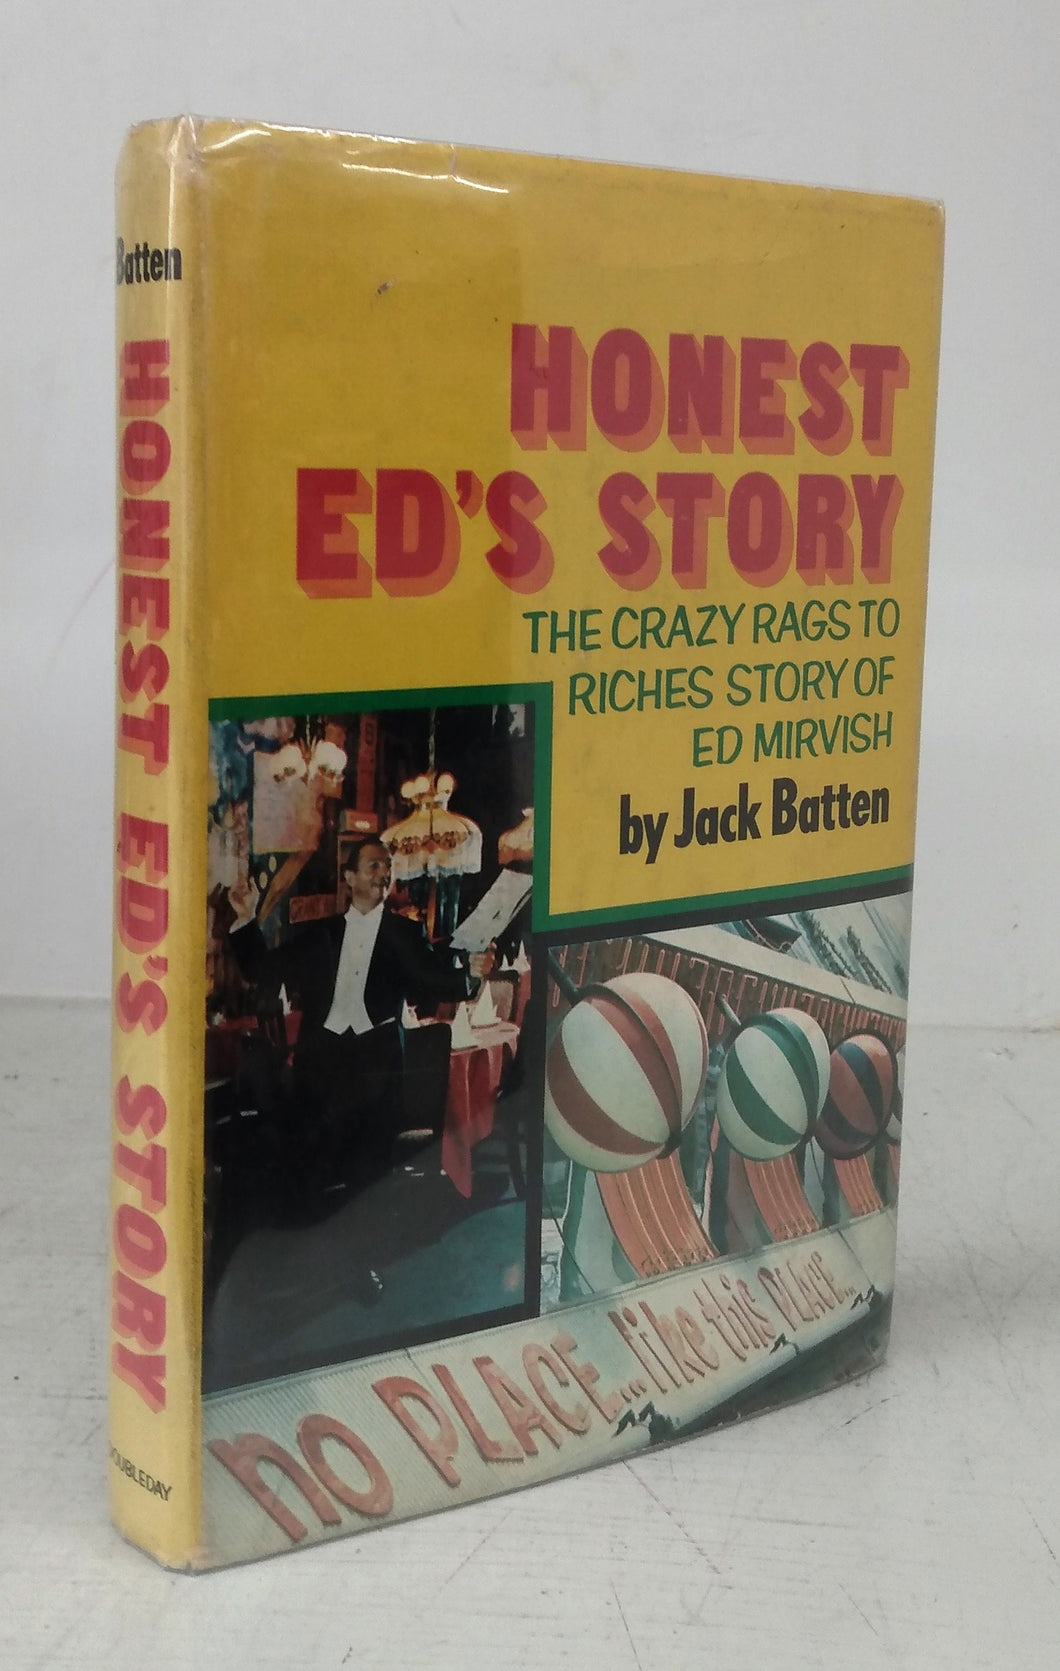 Honest Ed's Story: The Crazy Rags to Riches Story of Ed Mirvish